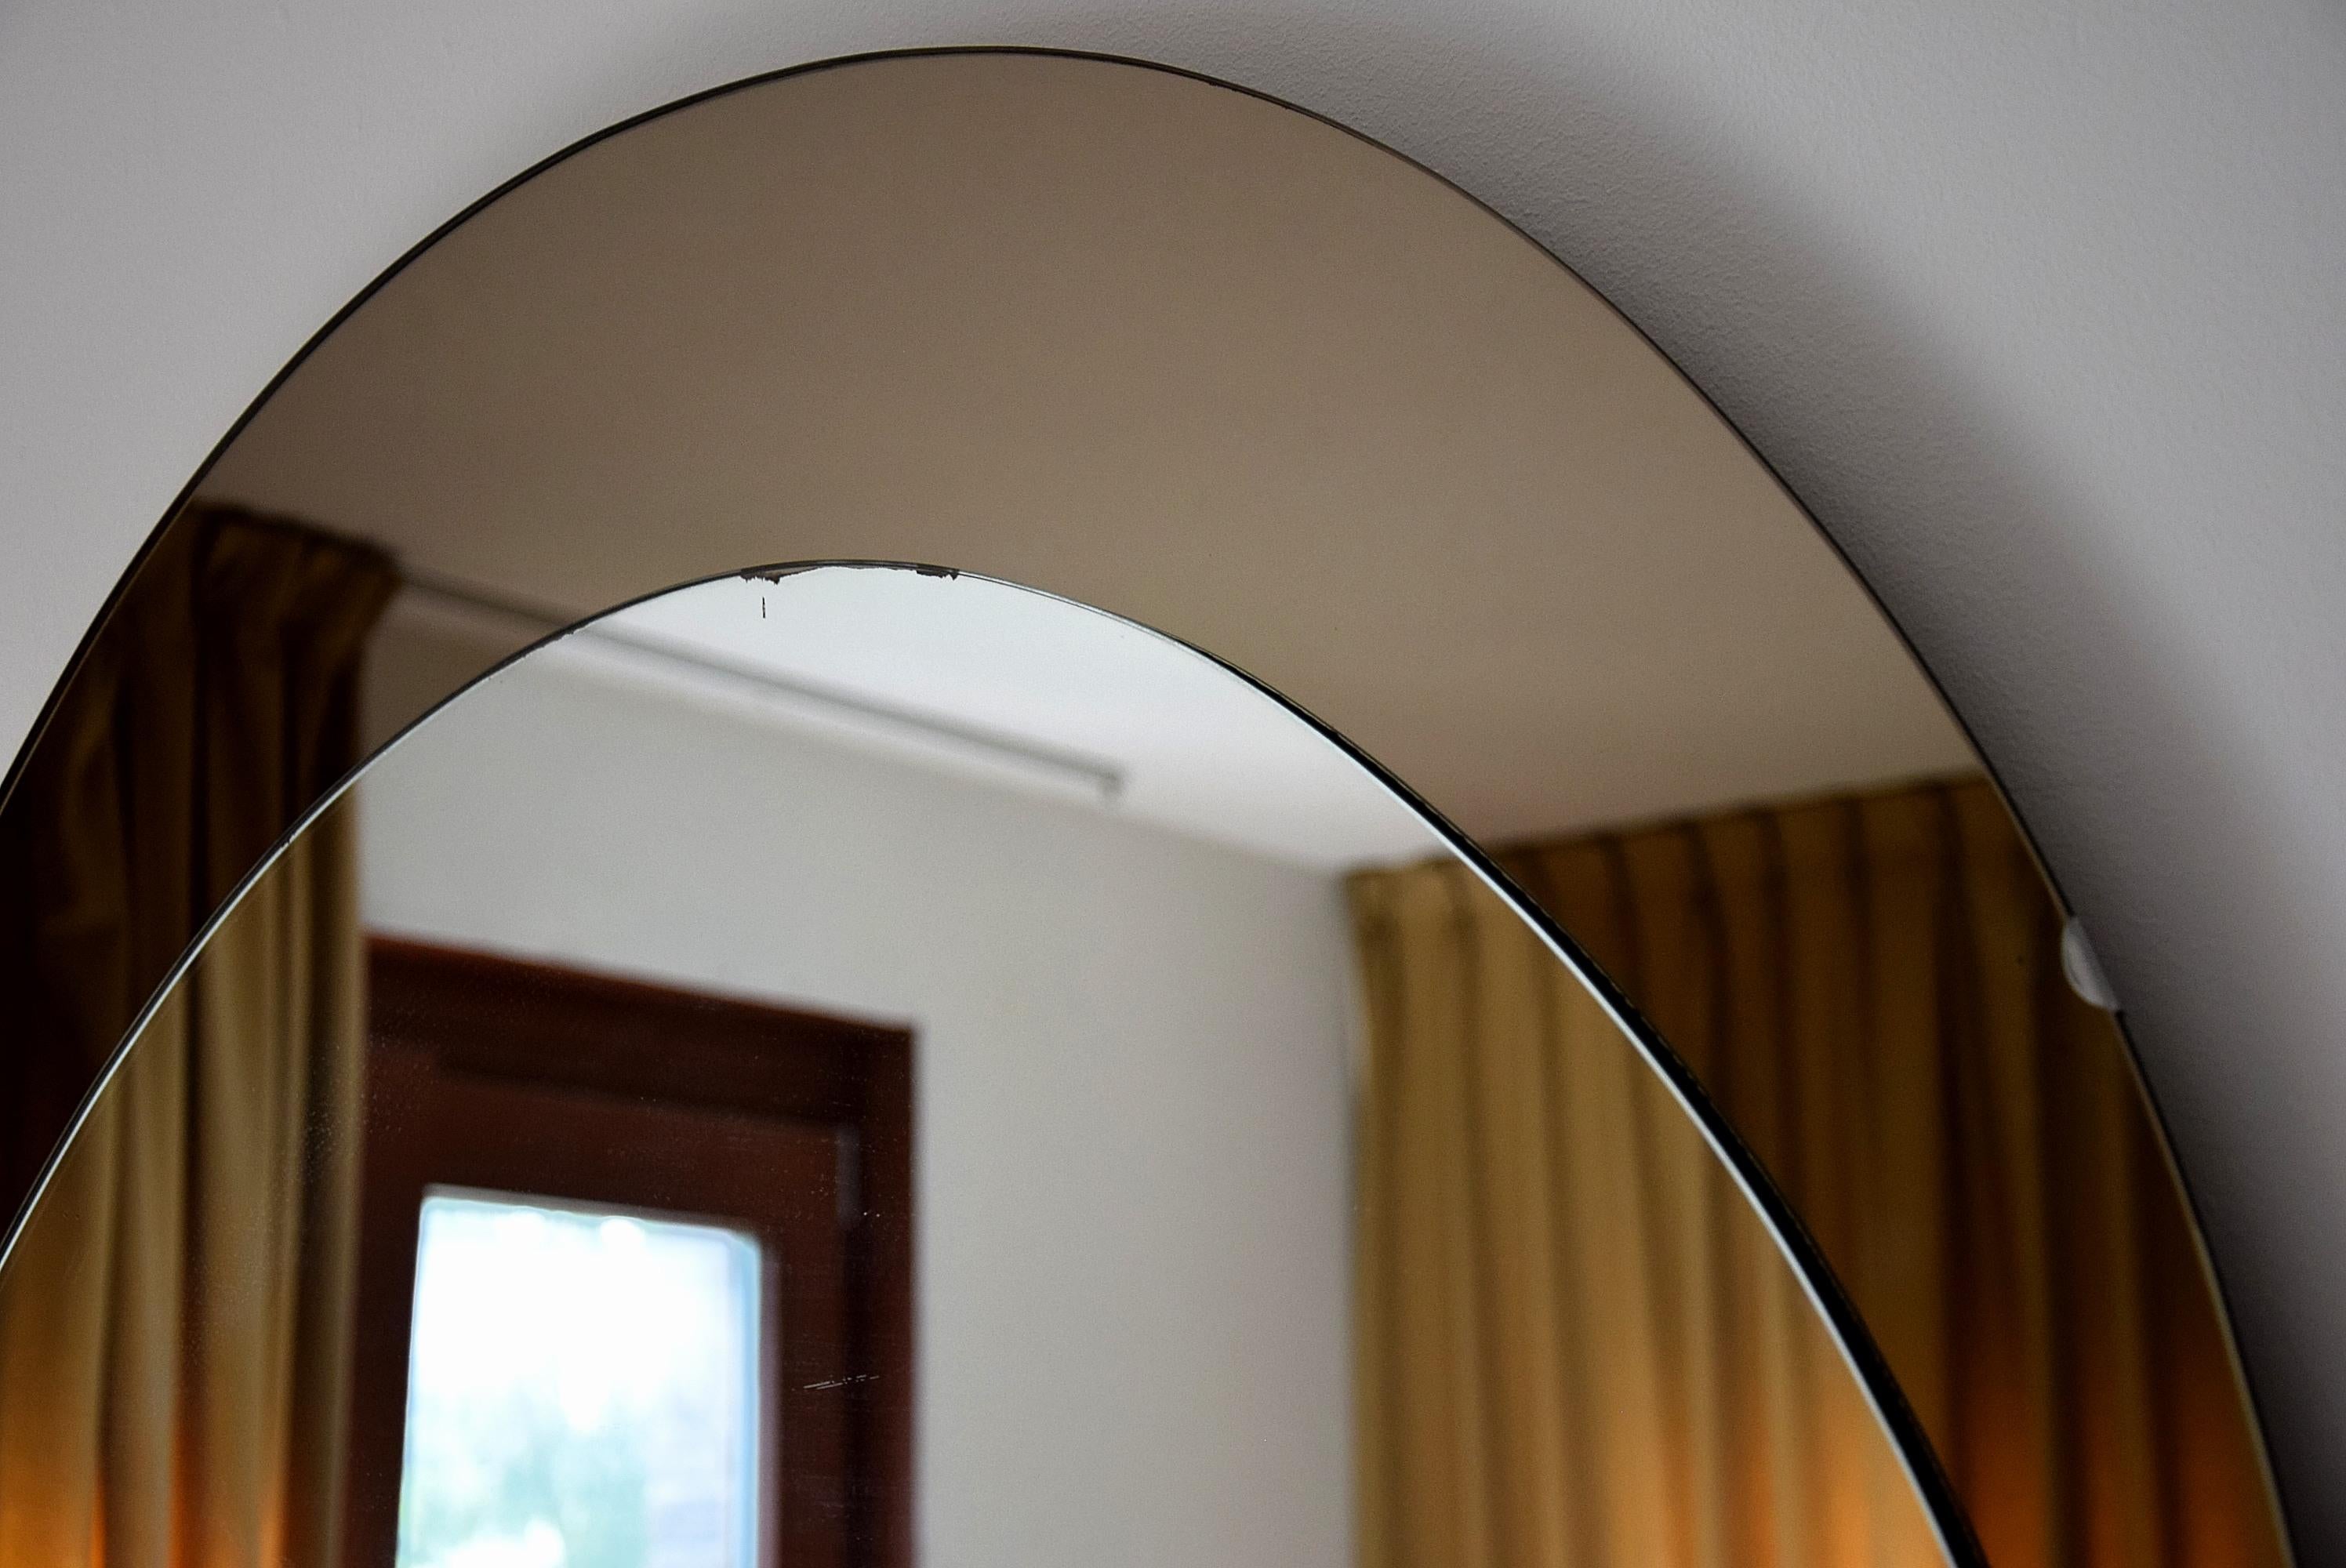 Large Italian Oval Mid-Century Modern Mirror by Cristal Arte For Sale 5